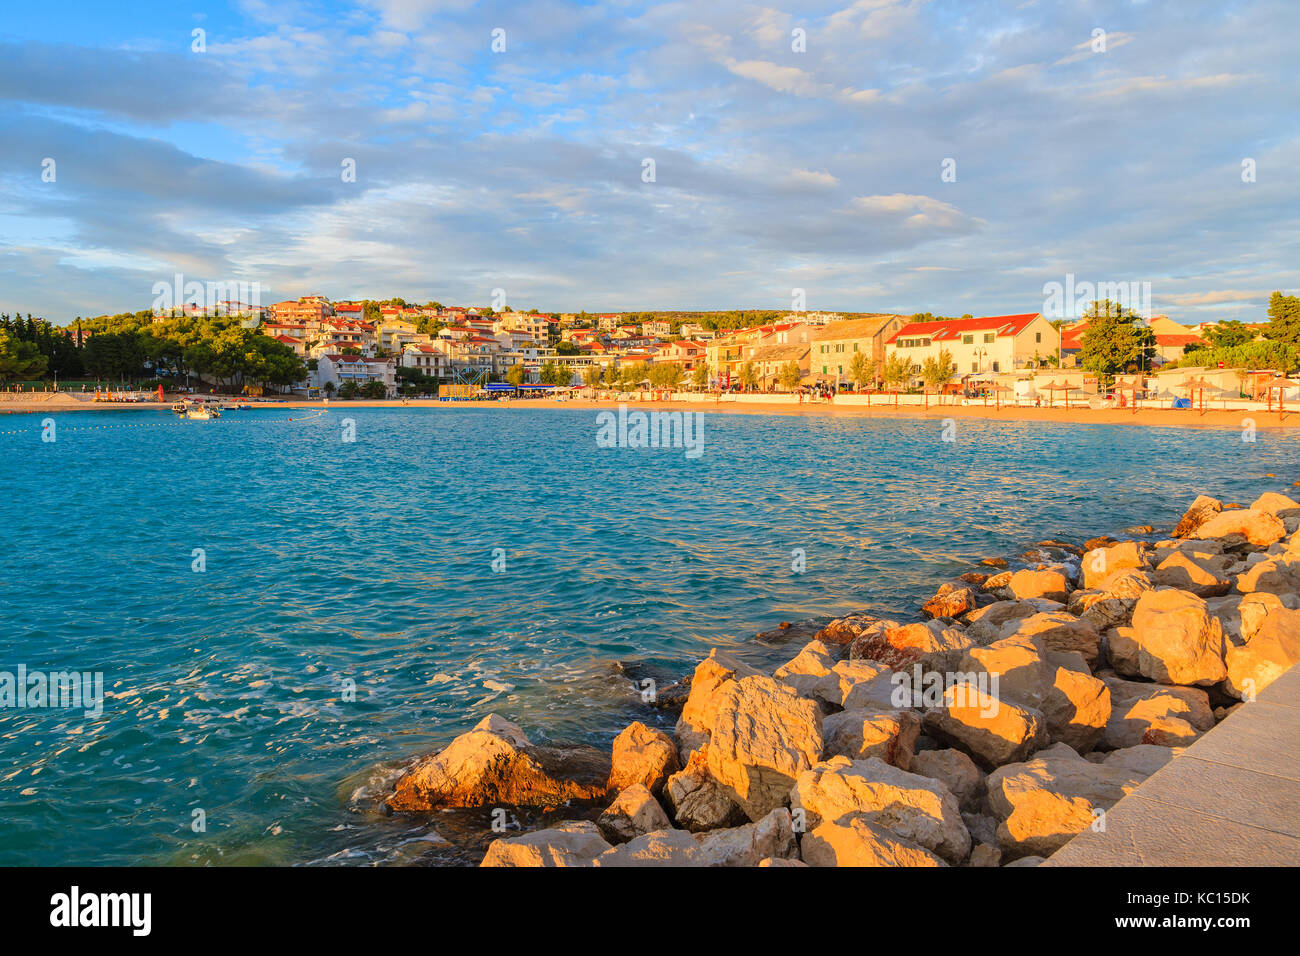 View of coast and beach at sunset time in Primosten town, Dalmatia, Croatia Stock Photo